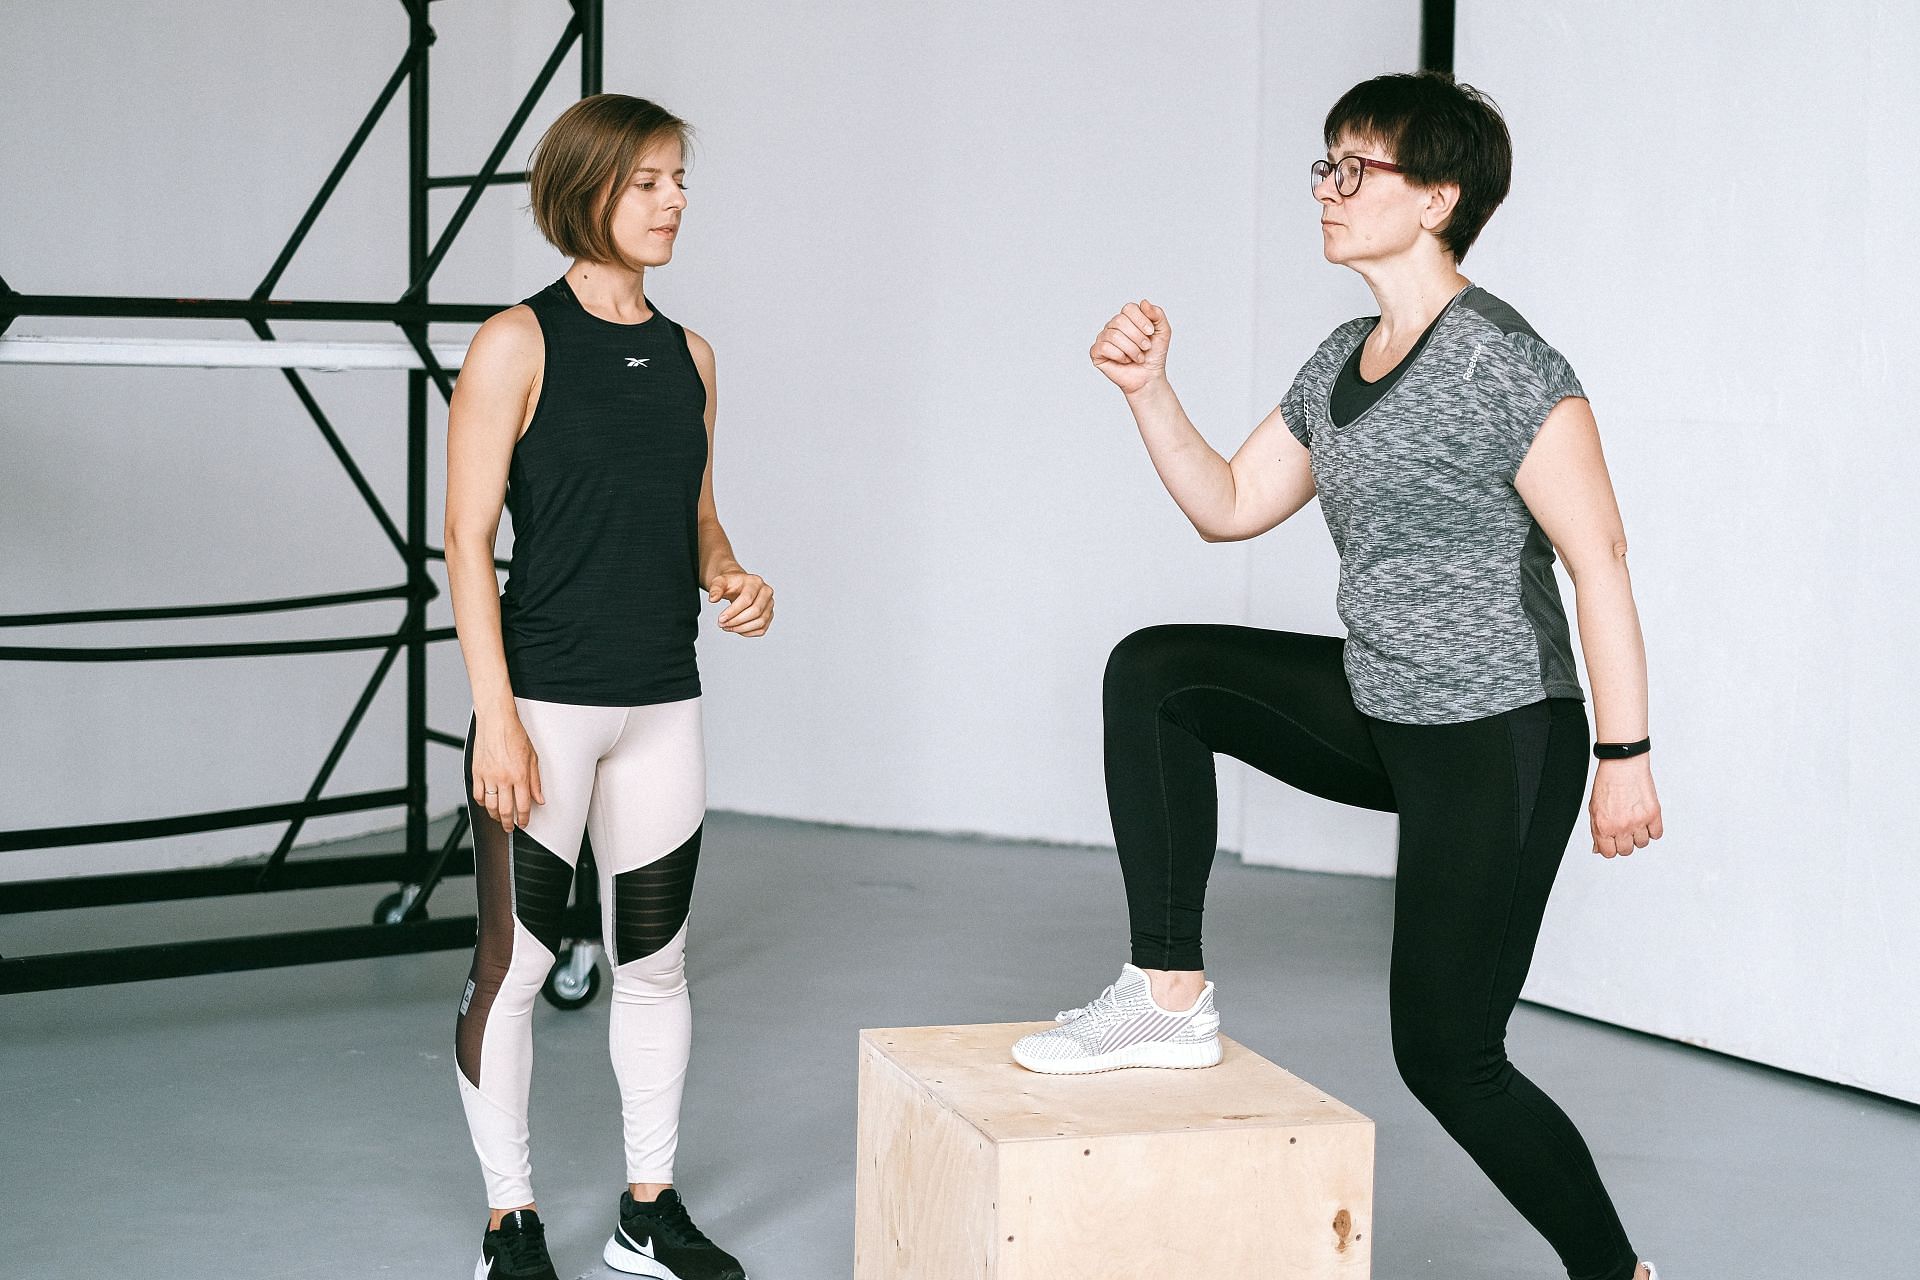 Step ups are an excellent way to build balance and stability (Image from Pexels @Anna Shvets)